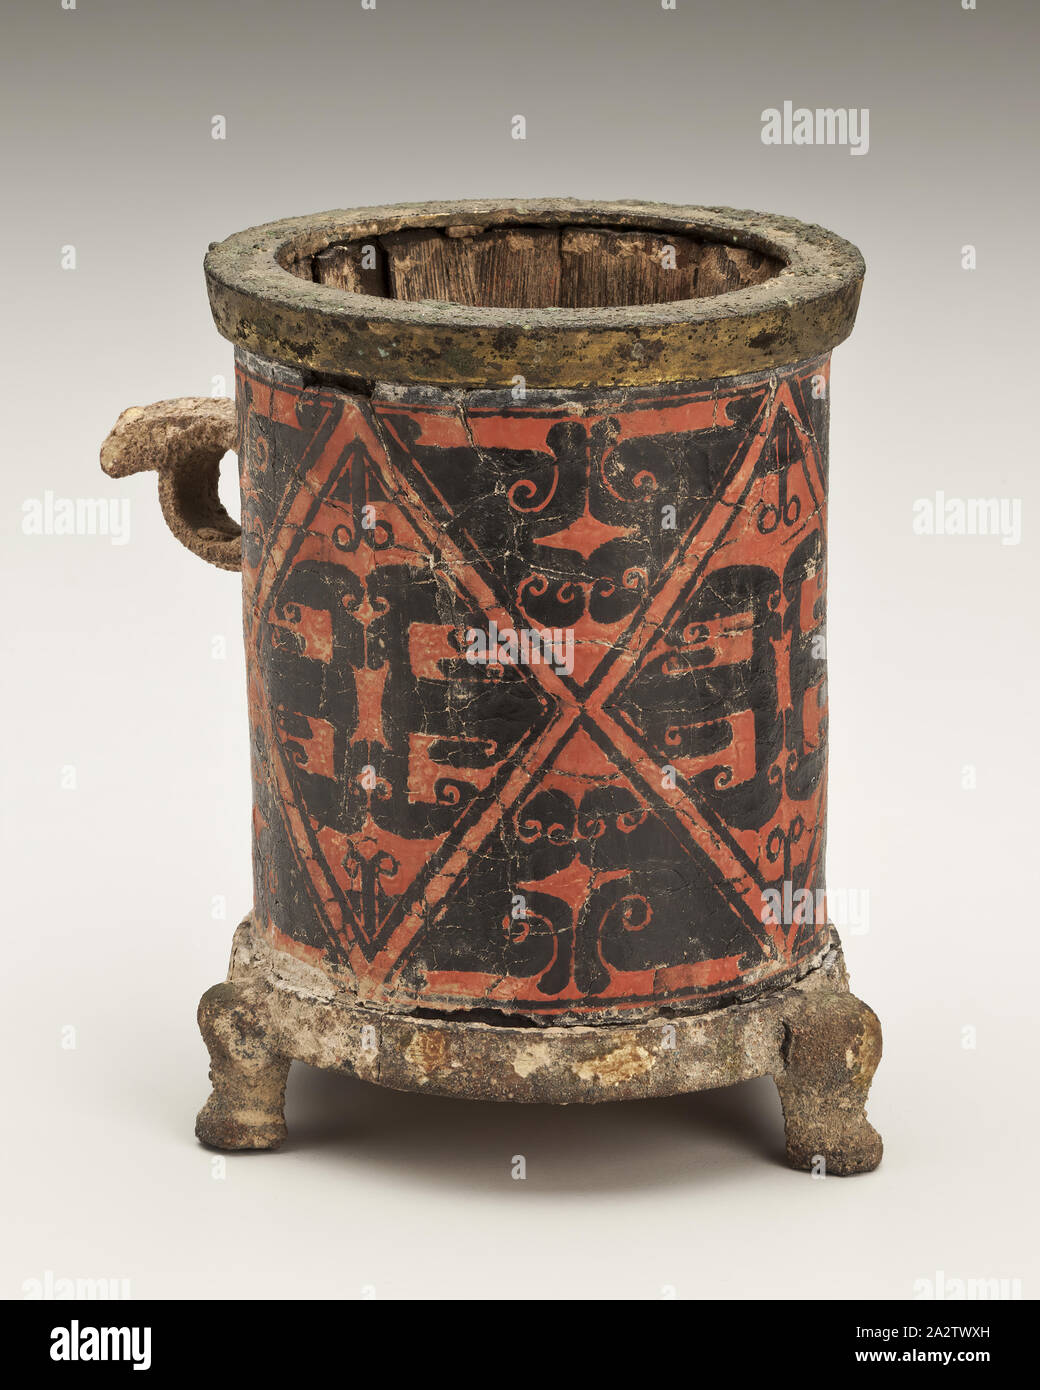 lacquer cup with handle, Eastern Zhou dynasty, Eastern Zhou dynasty, 300-200 B.C.E., Lacquer On Bamboo, red, Black Painted Decoration, H: 4-3.8, Asian Art Stock Photo